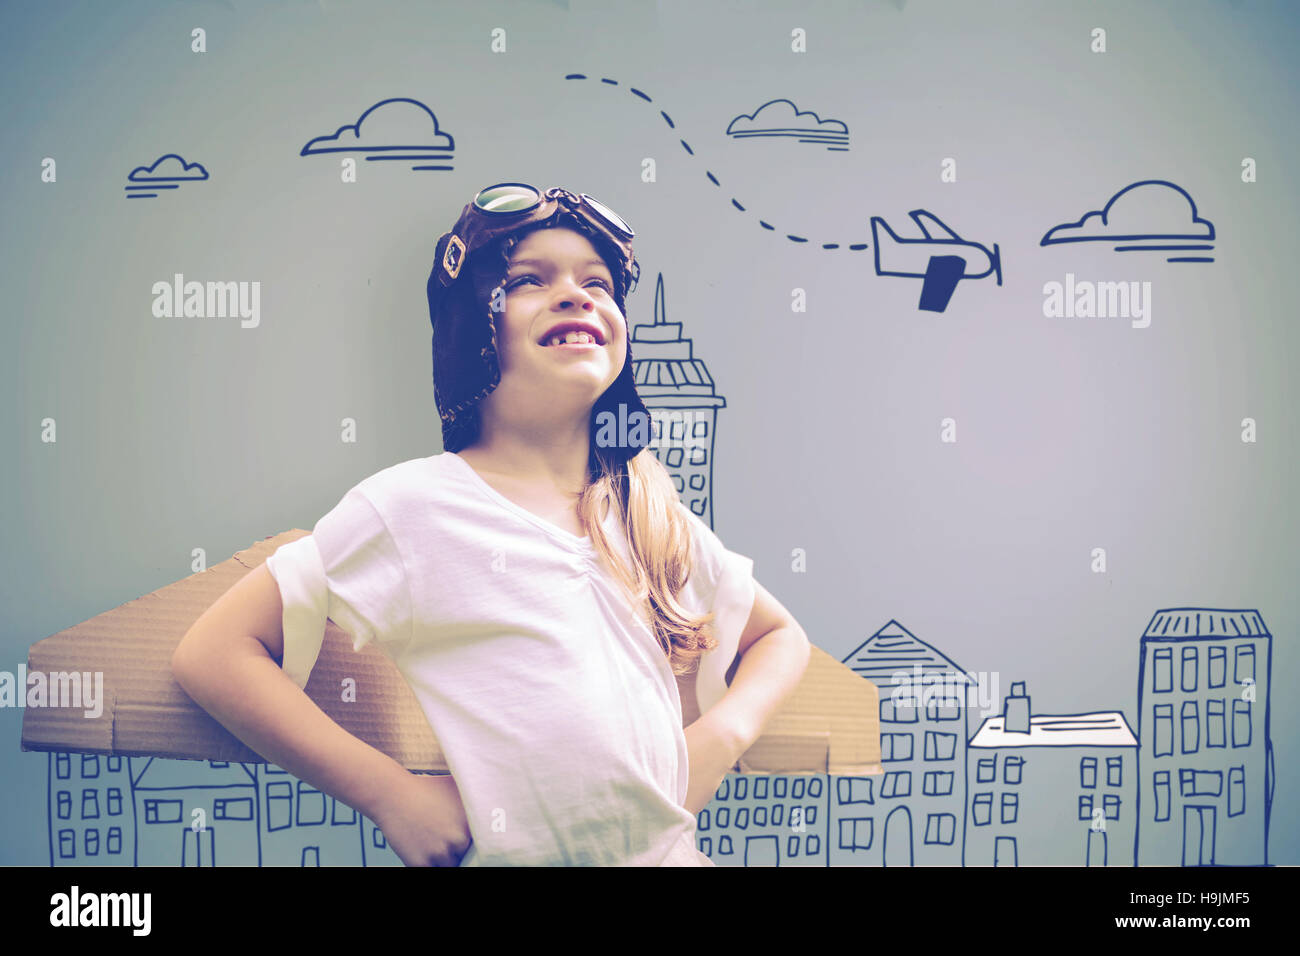 Composite image of girl wearing flying goggles Stock Photo